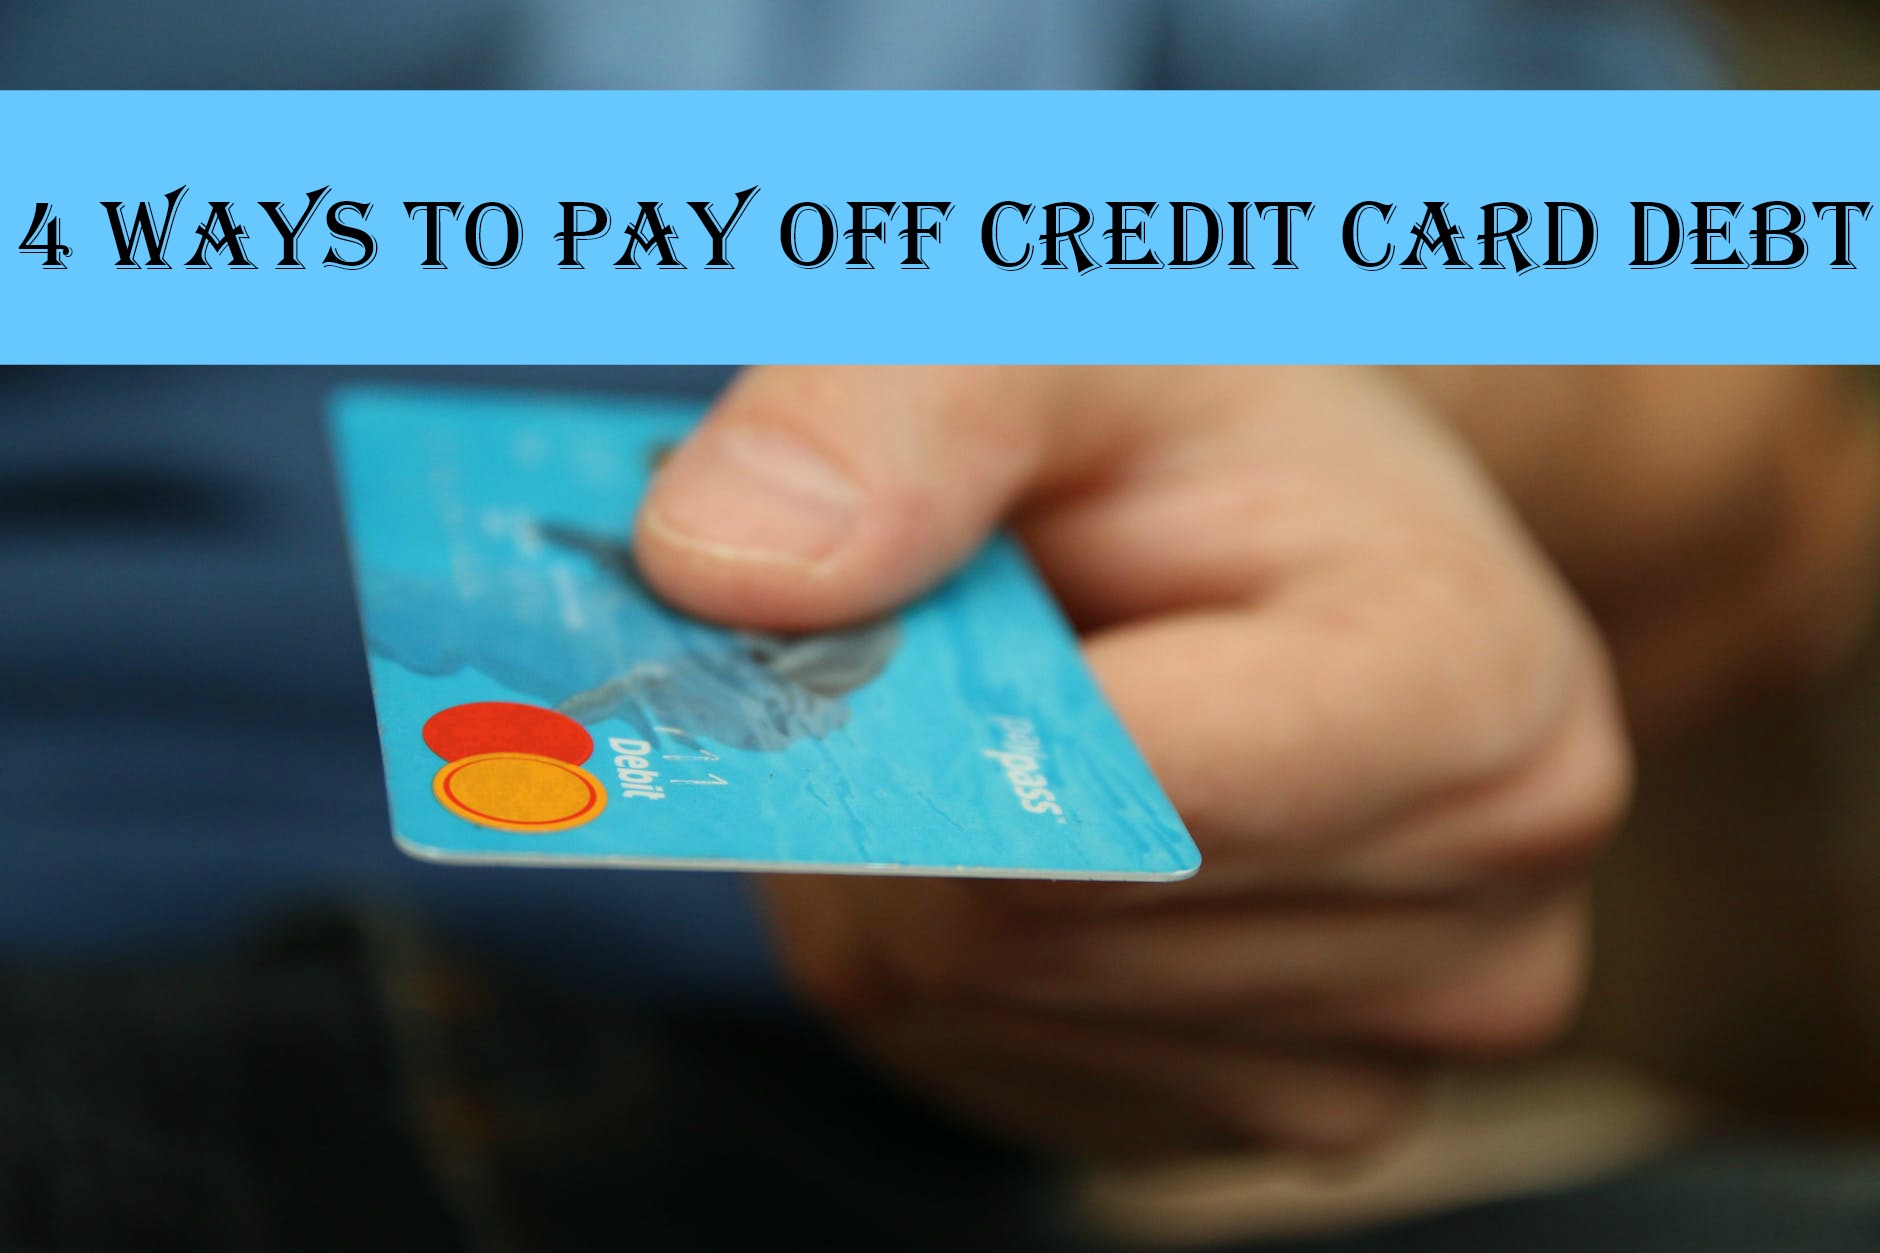 4 Ways to Pay Off Credit Card Debt